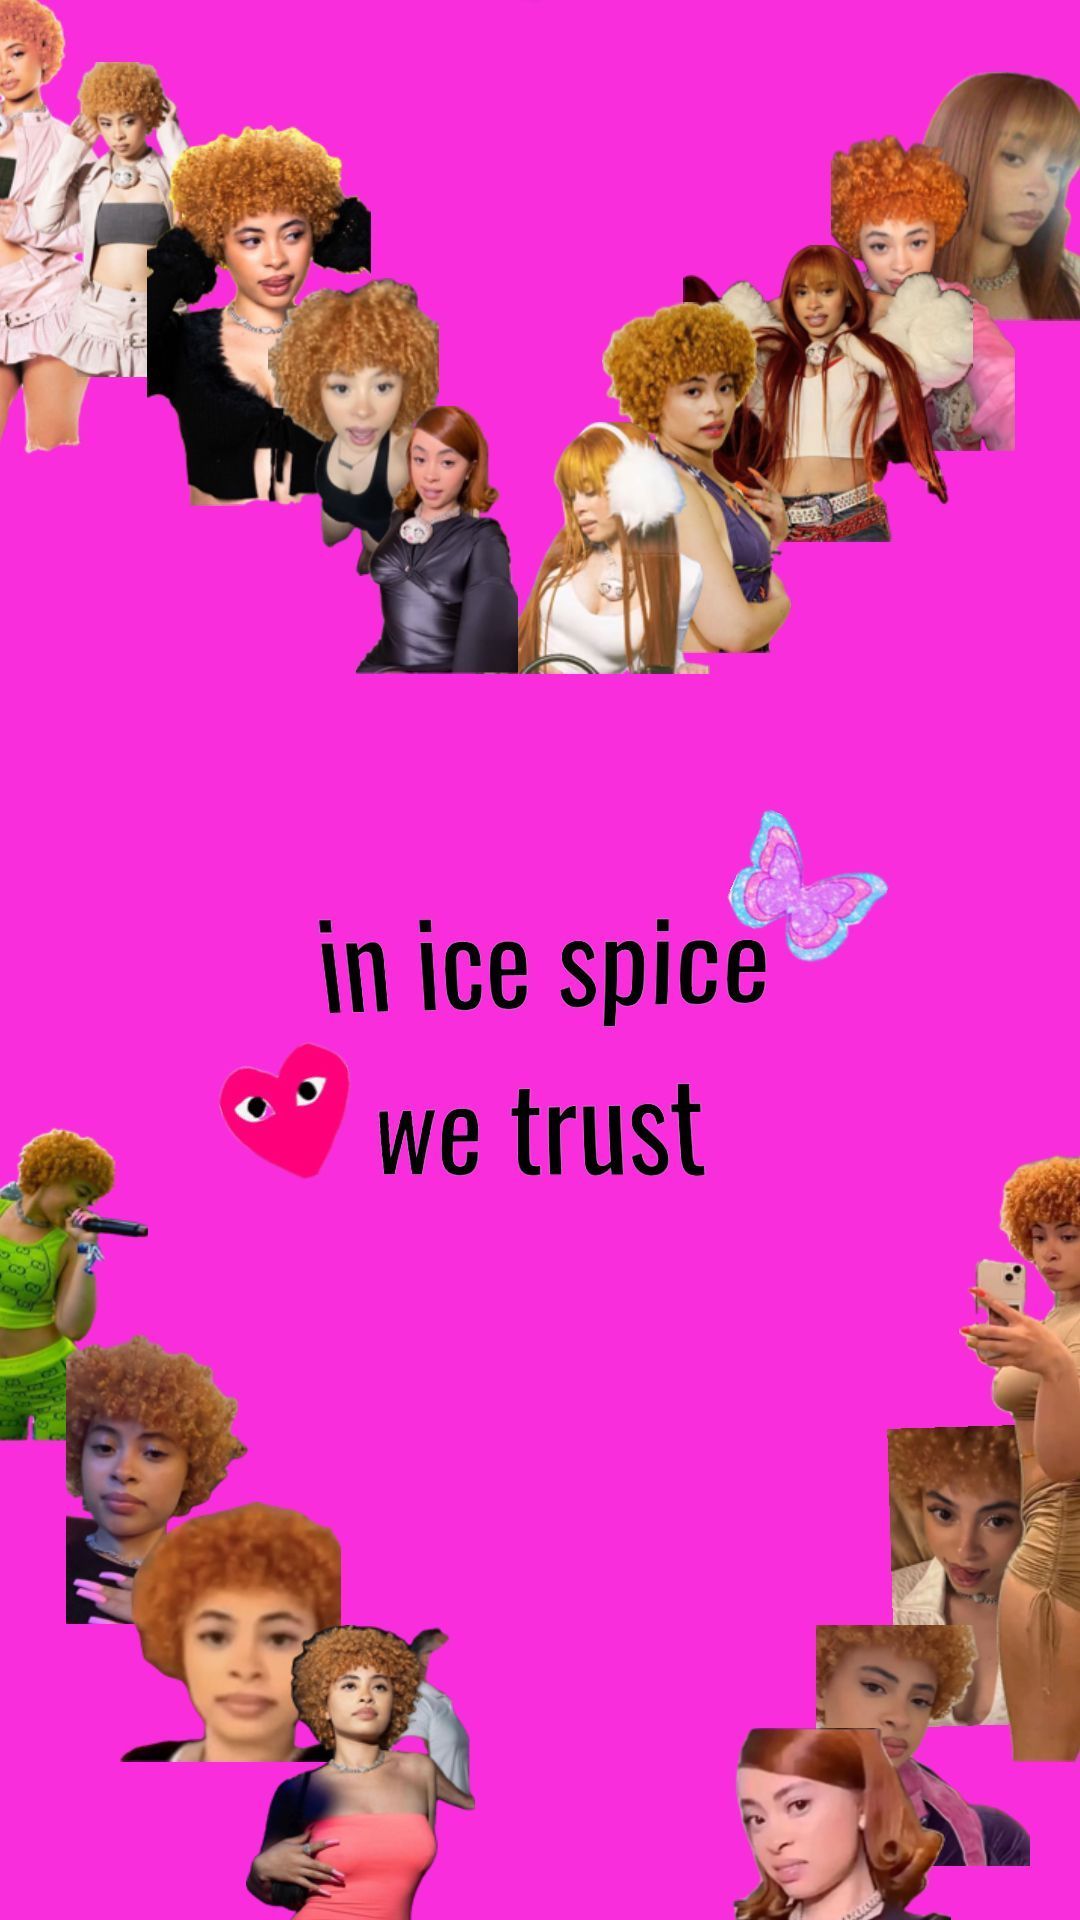 yes. Ice and spice, Cute shirt designs, Relatable